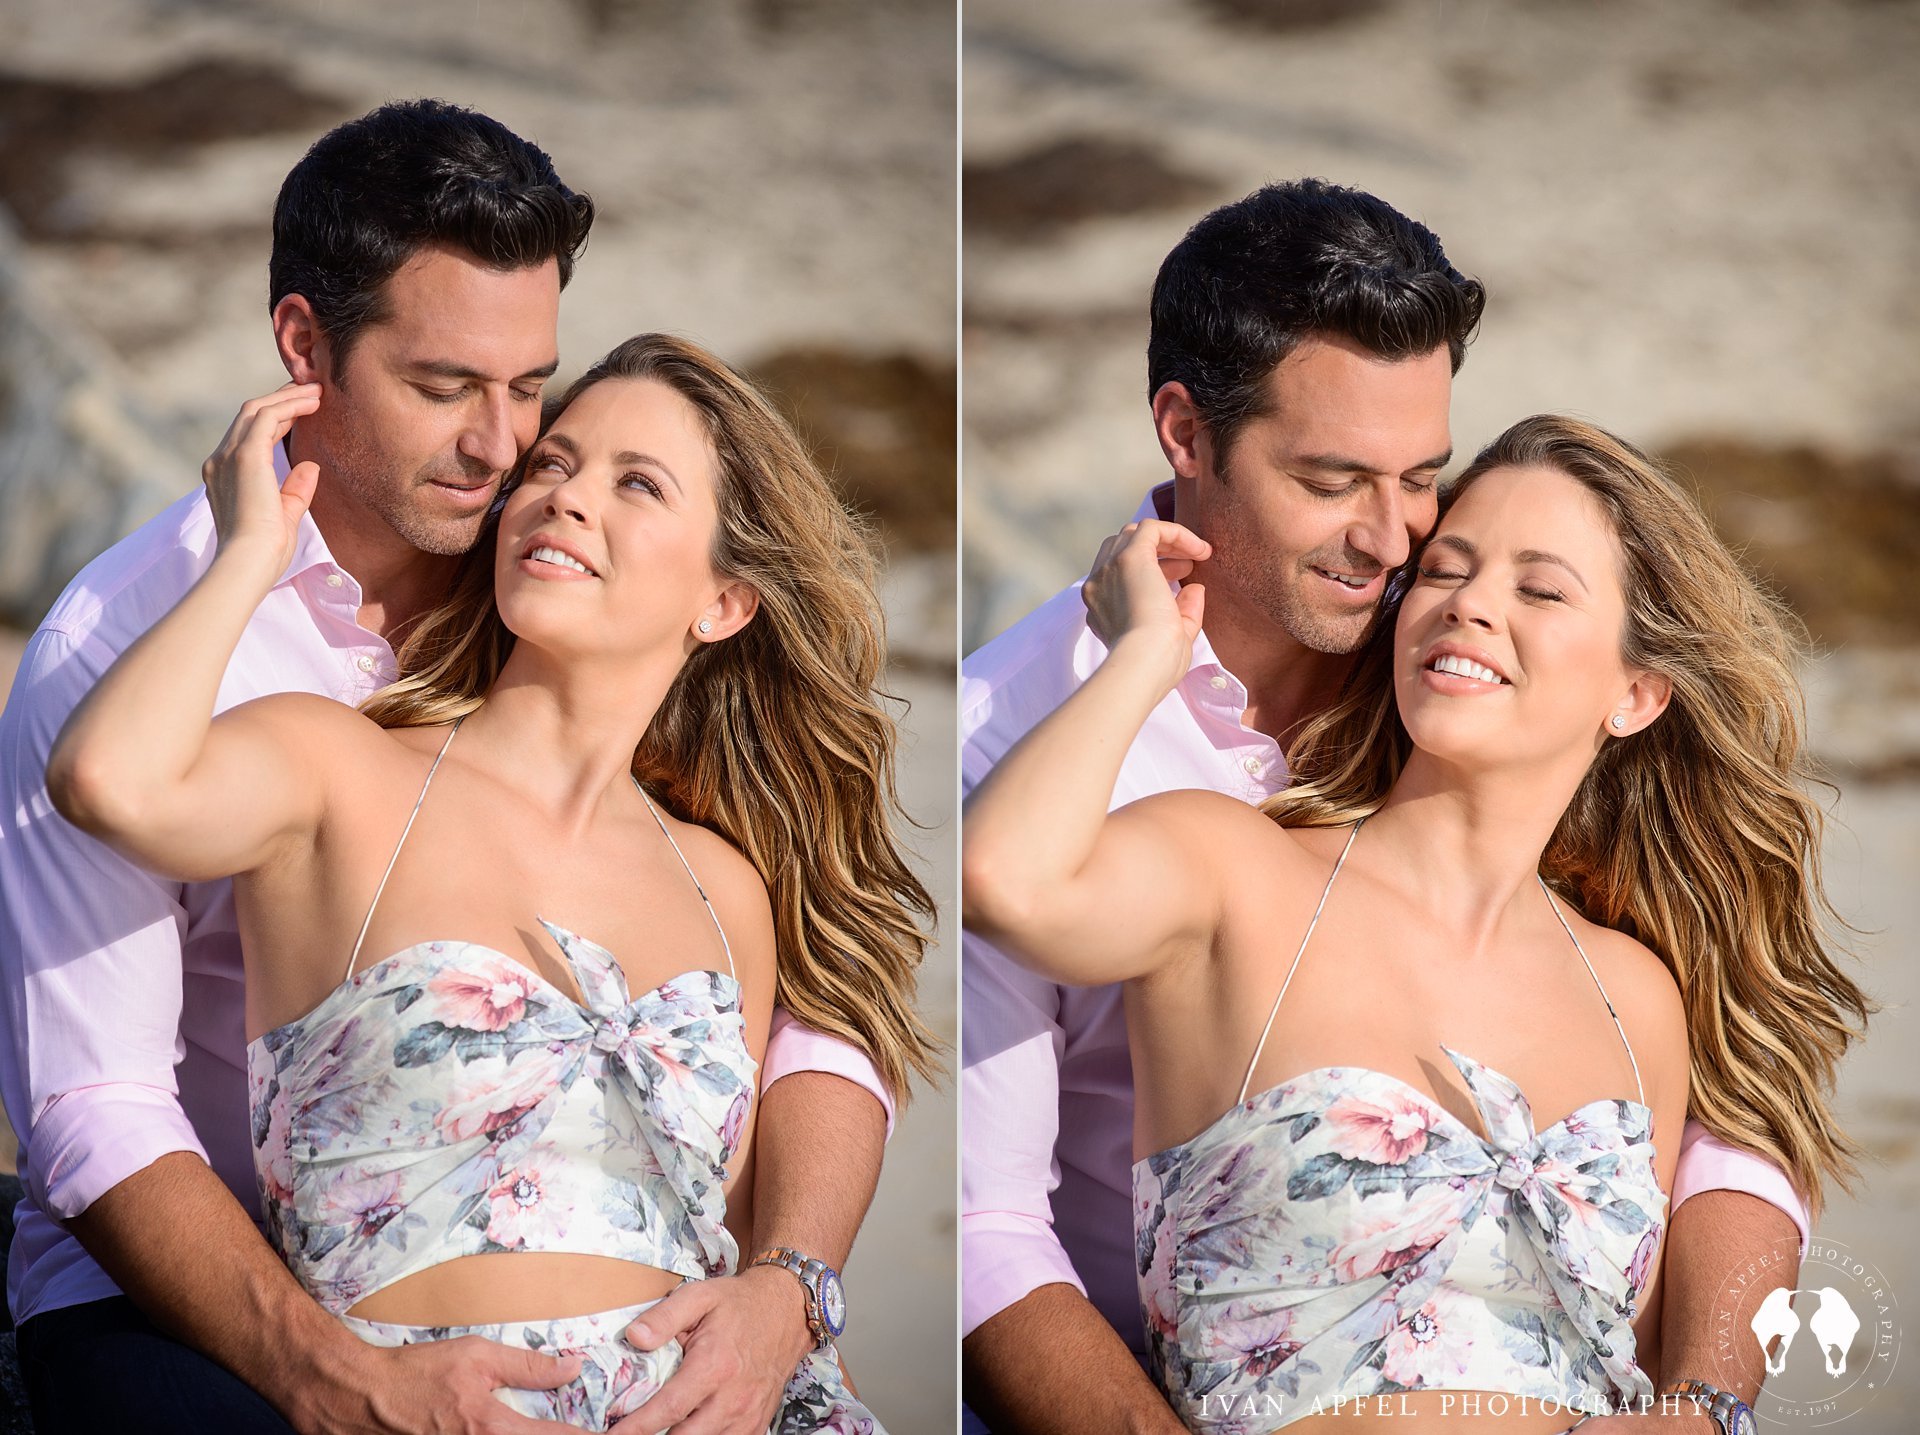 ximena duque and jay adkins engagement session ivan apfel photography miami_0012.jpg